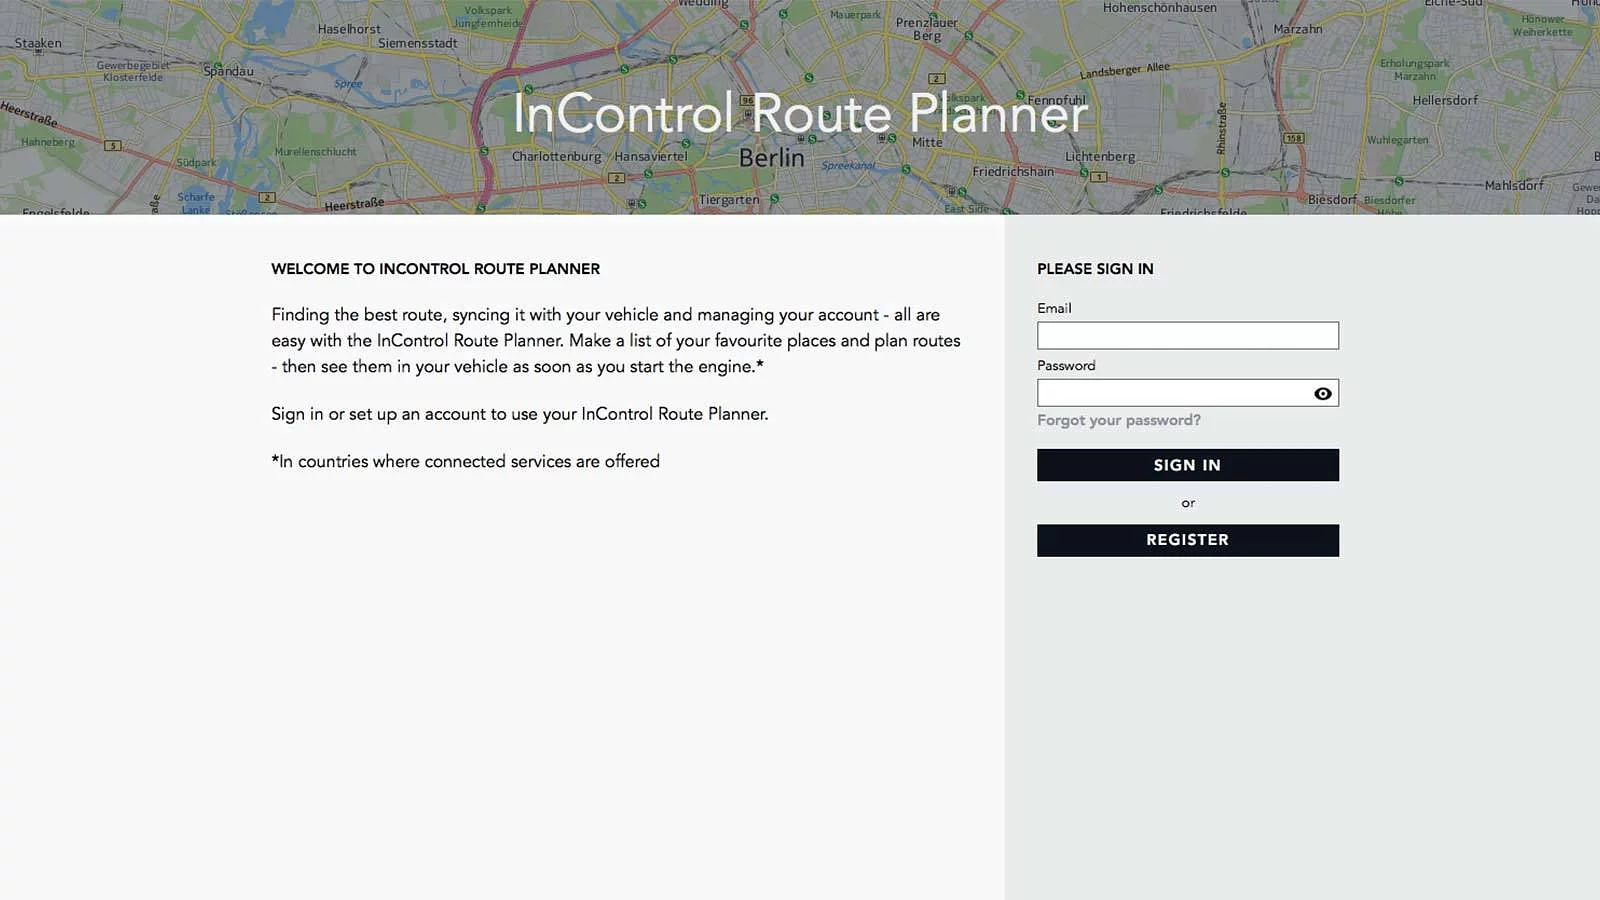 Dostęp do InControl Route Planner